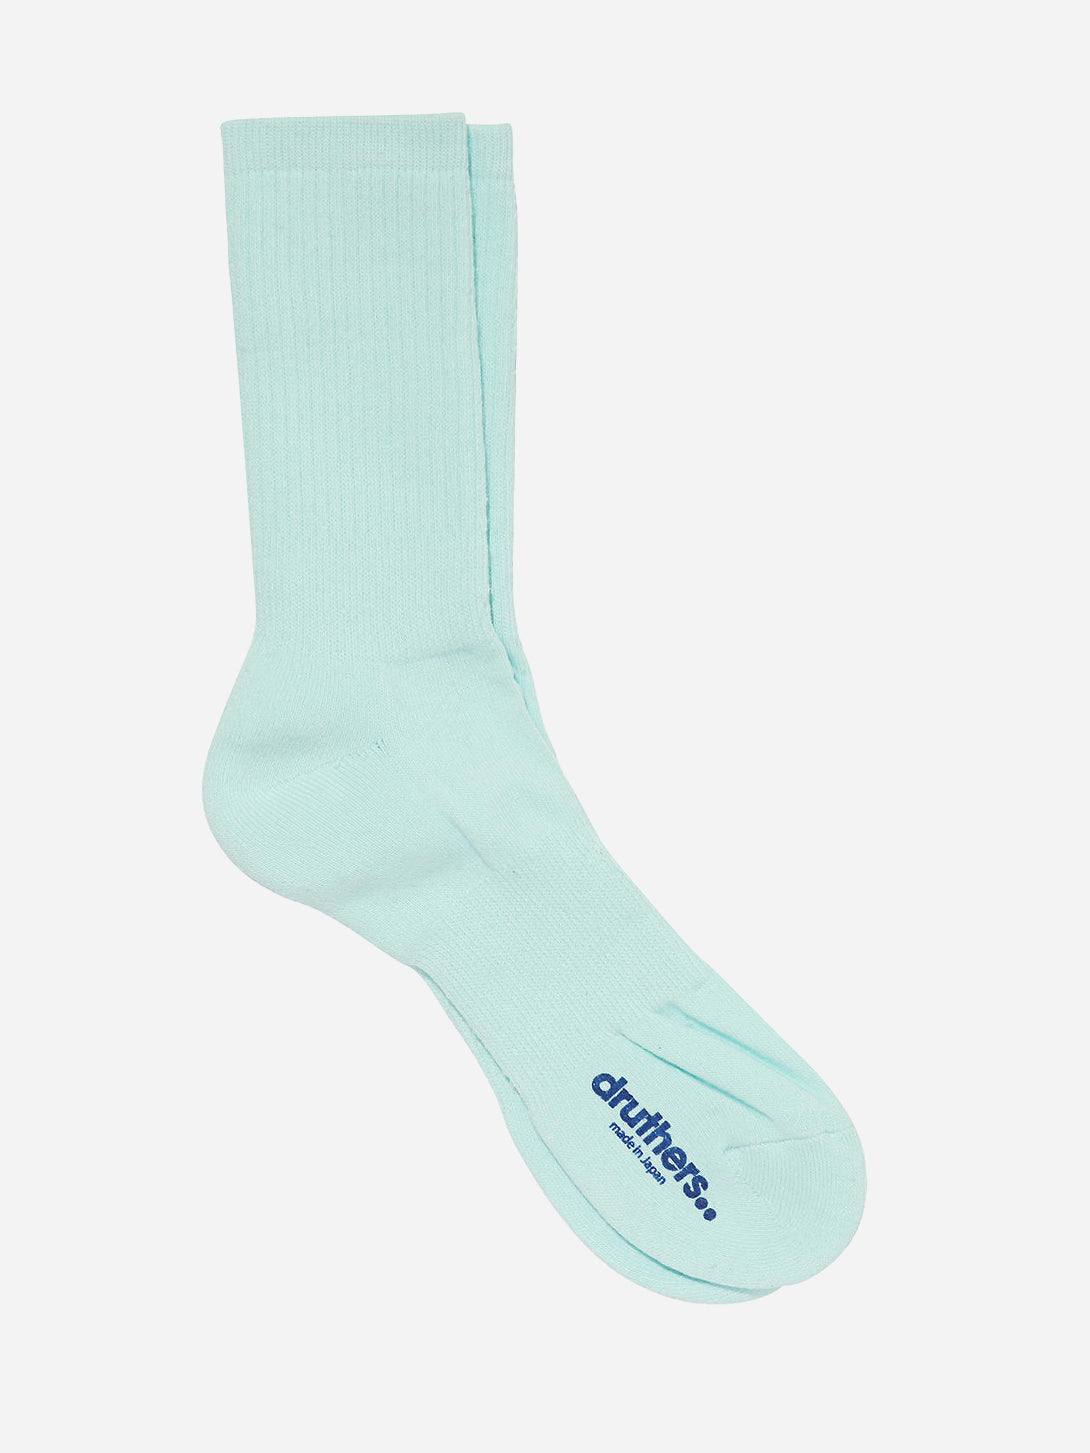 Mint druthers socks for ons clothing